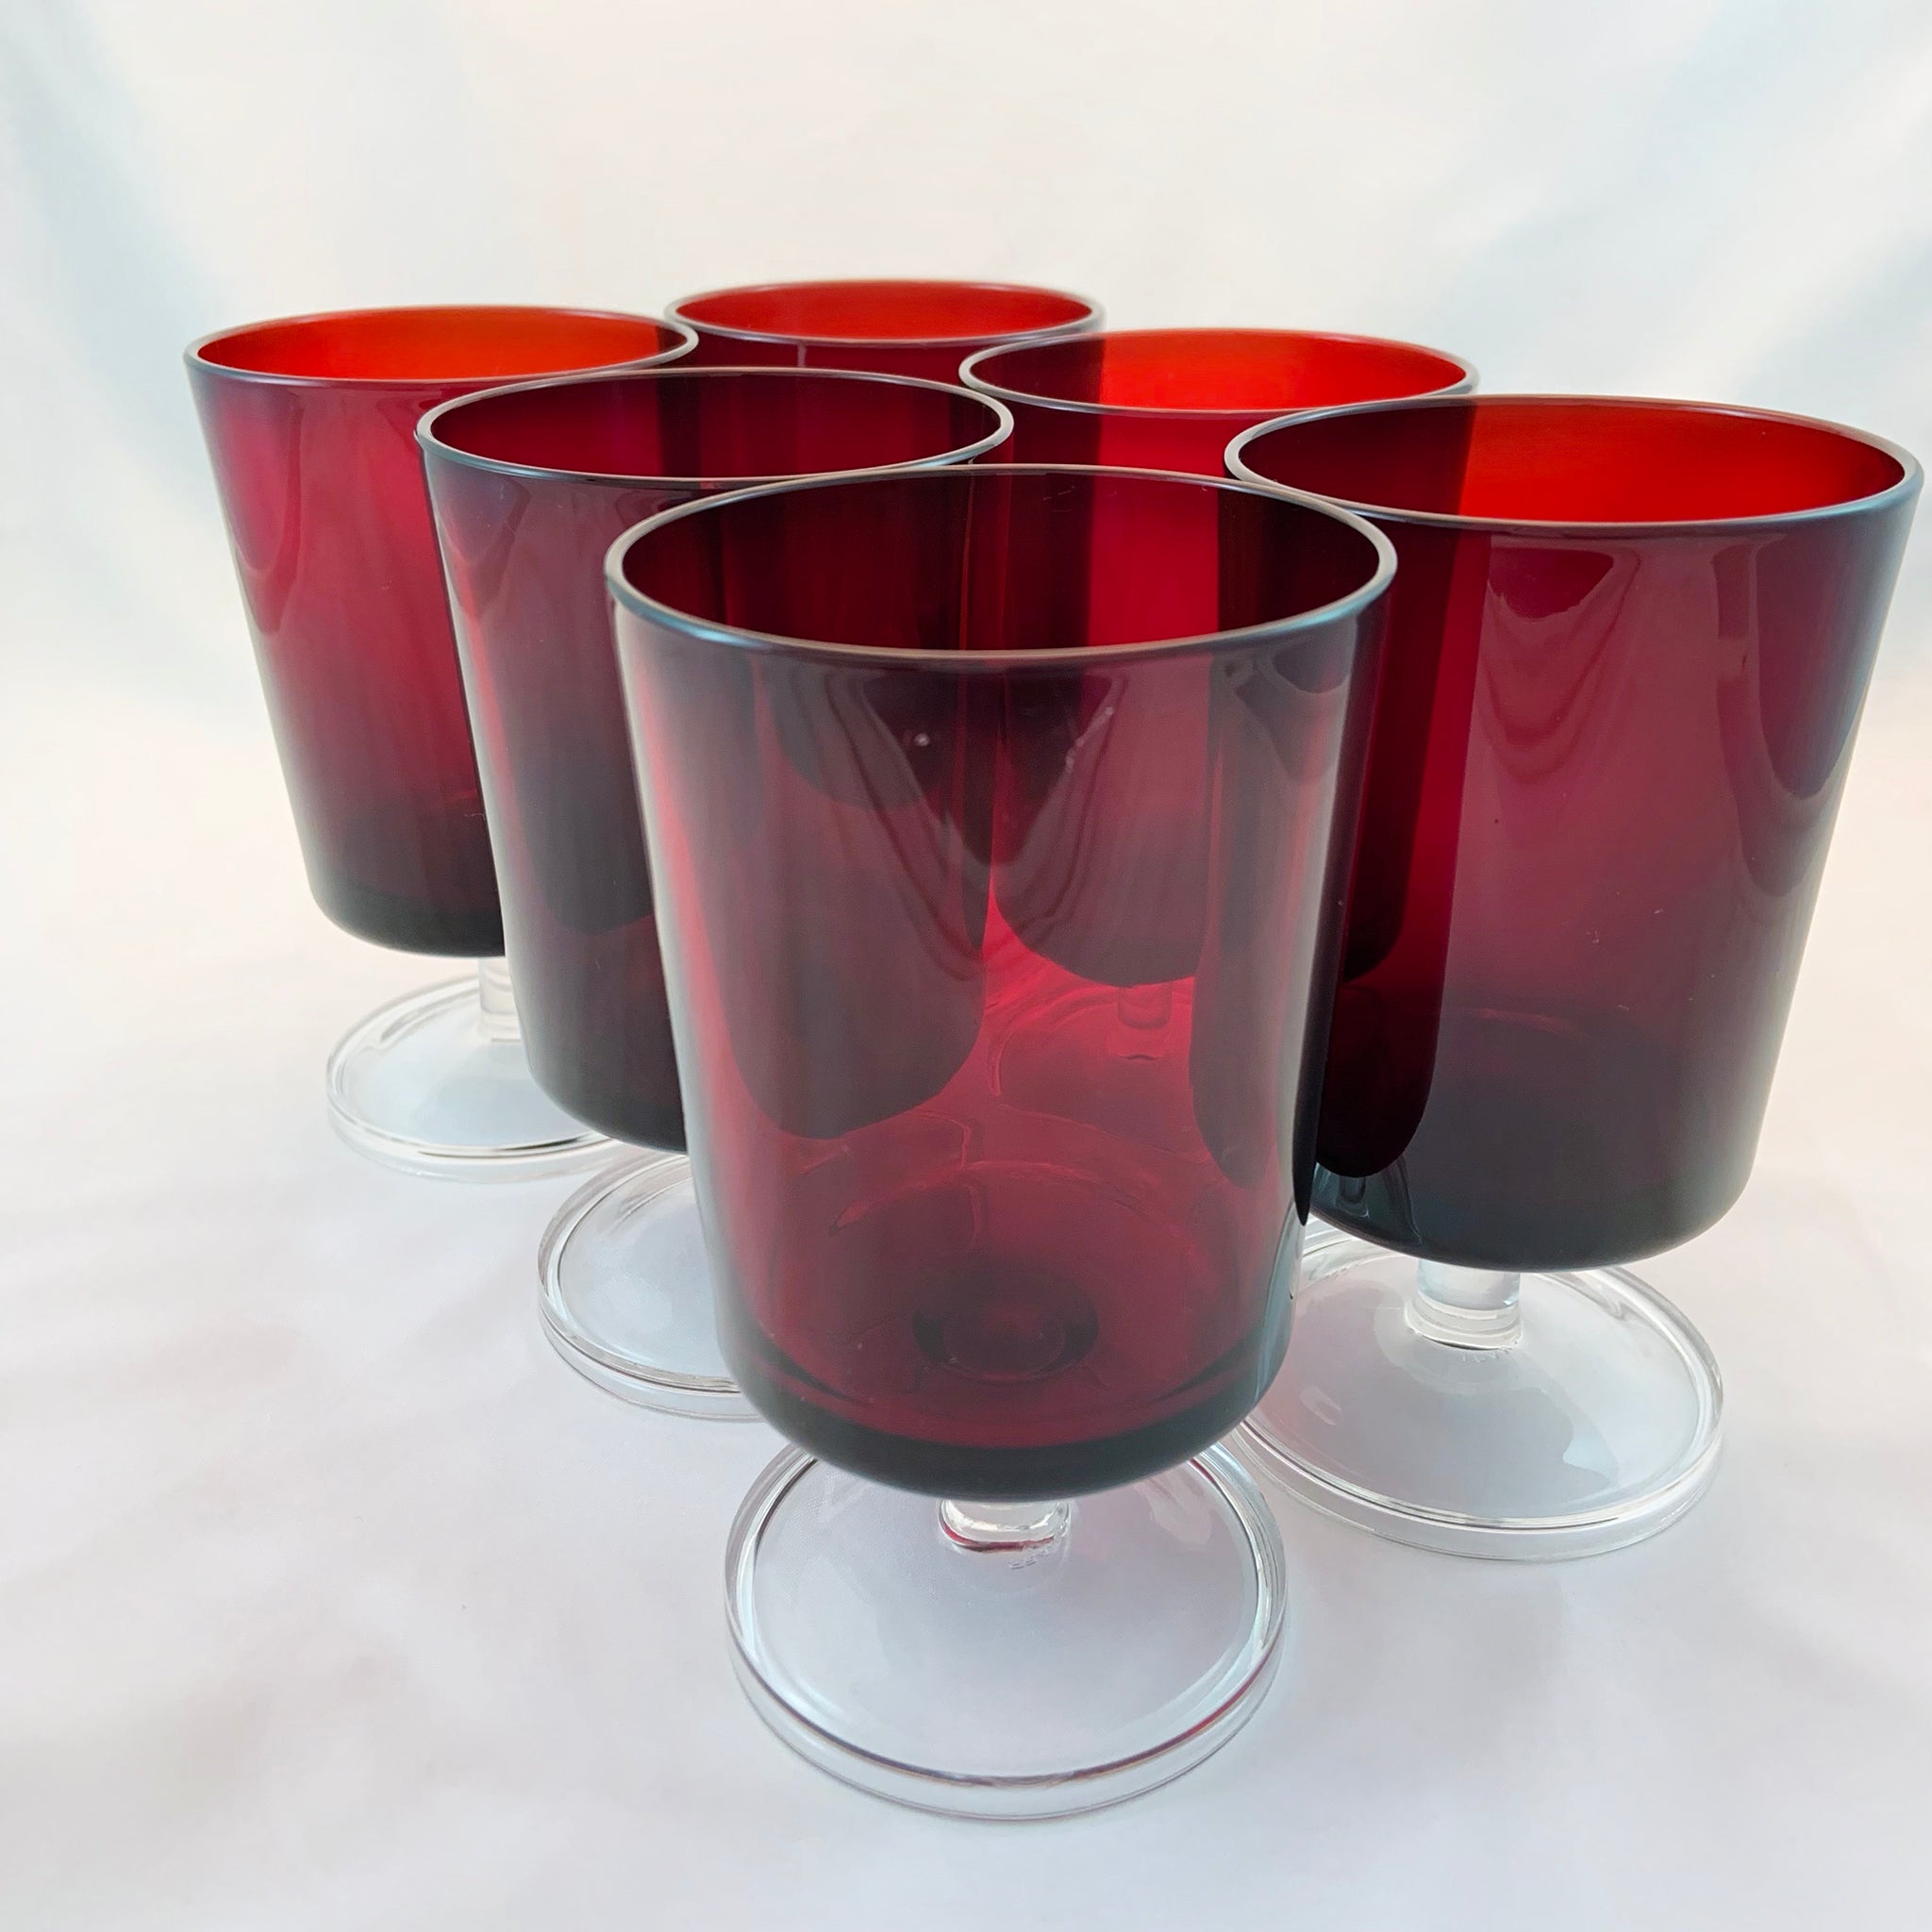 Special Order Red Stemmed Wine Glasses Luminarc Cristal D' Arques Durand  Set of 7 Red Stemware Arcoroc France Retro 80's 